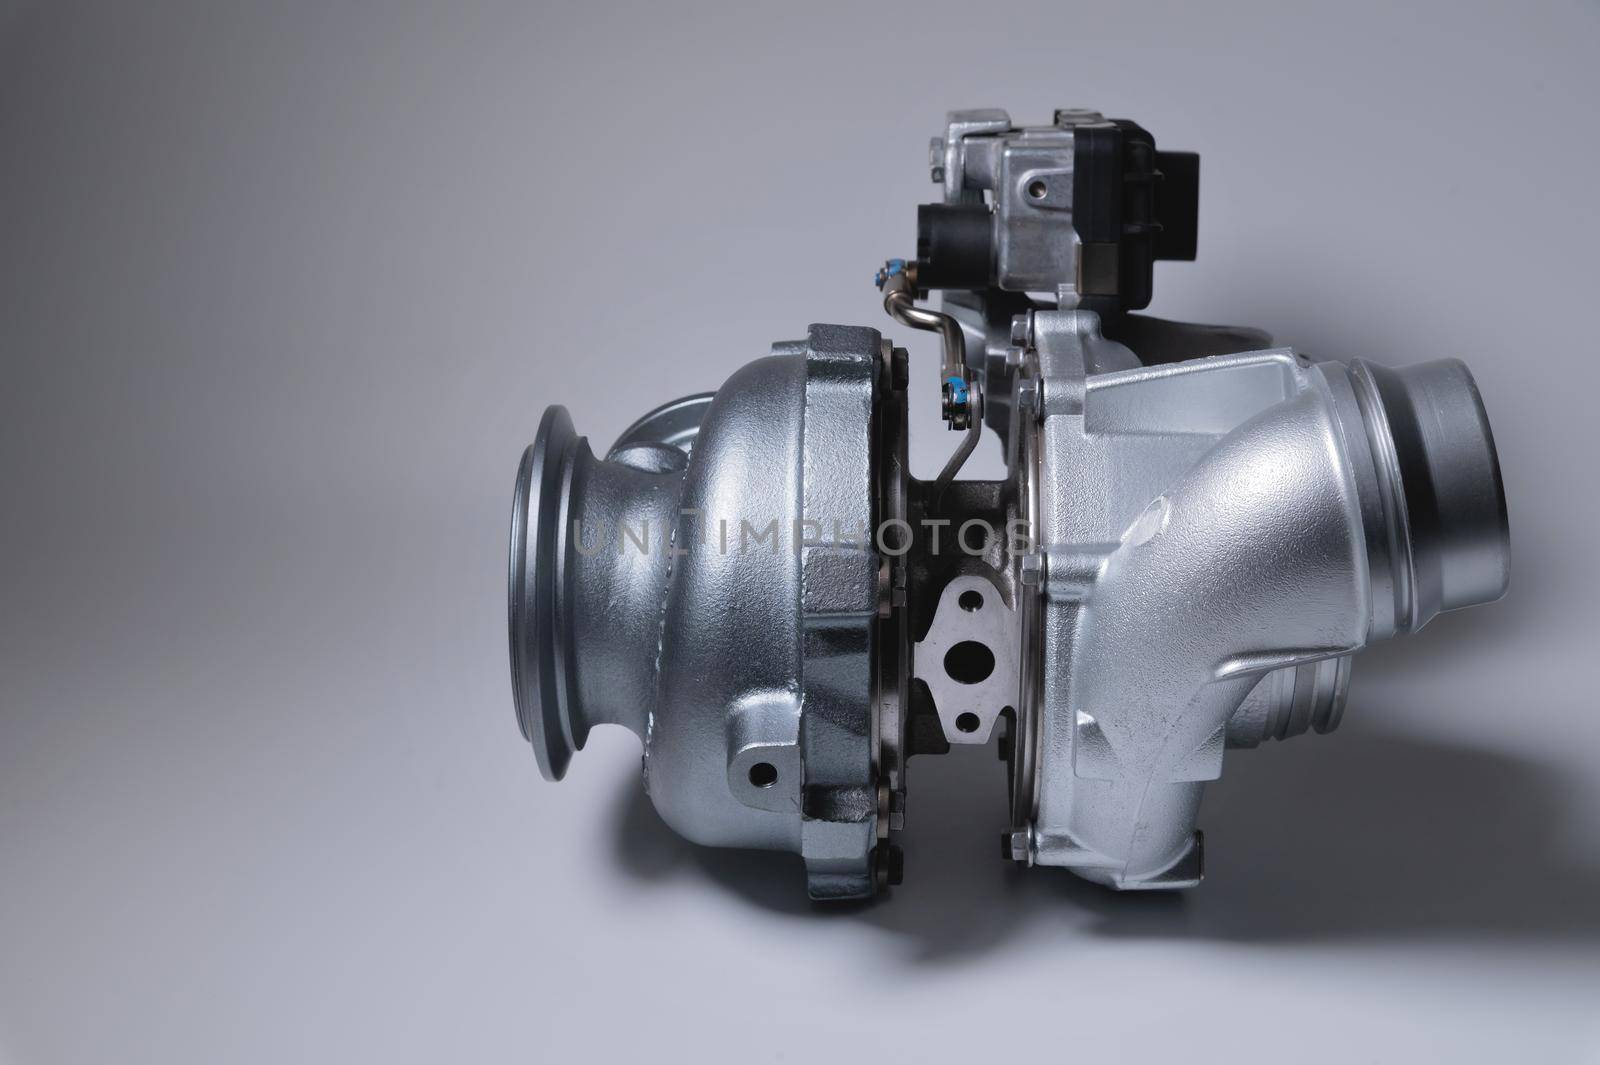 New metal turbocharger. Exhaust gas blower. Parts background.